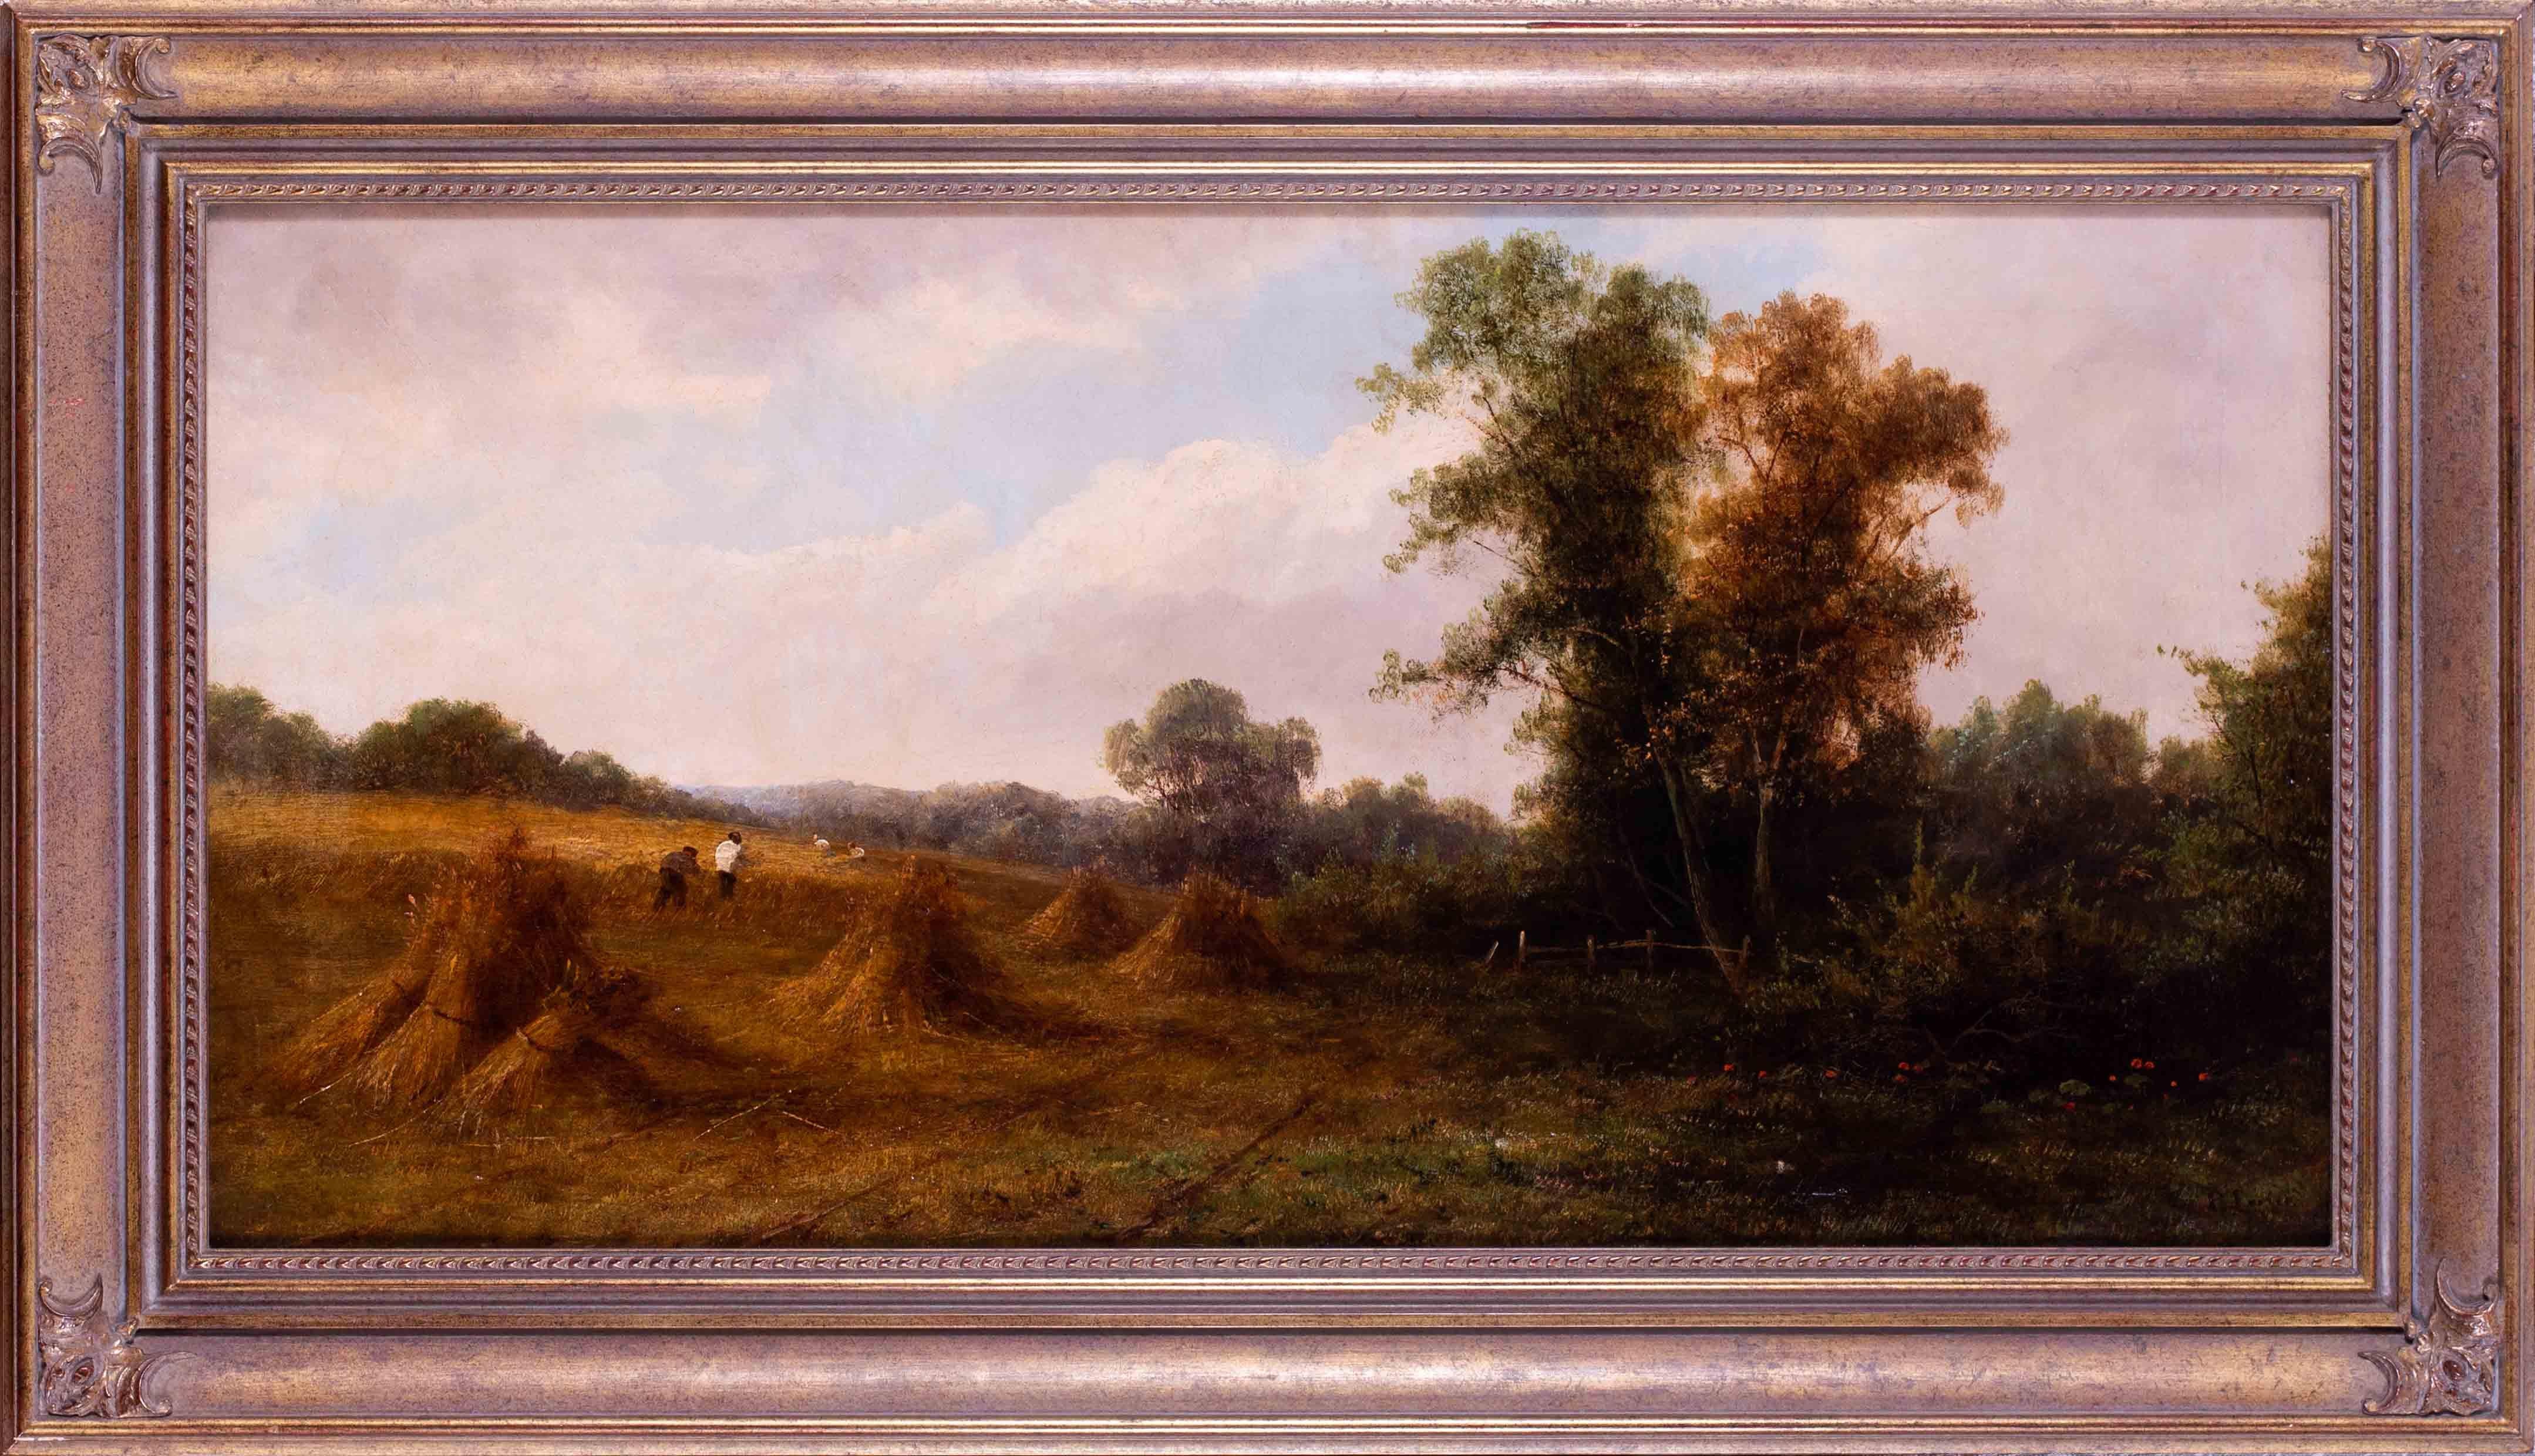 David Leslie (British, fl. 1860)
Harvesters in a field
Signed ‘D. Leslie’ (lower right)
Oil on canvas
14.1/2 x 29 in. (37 x 74 cm.)
